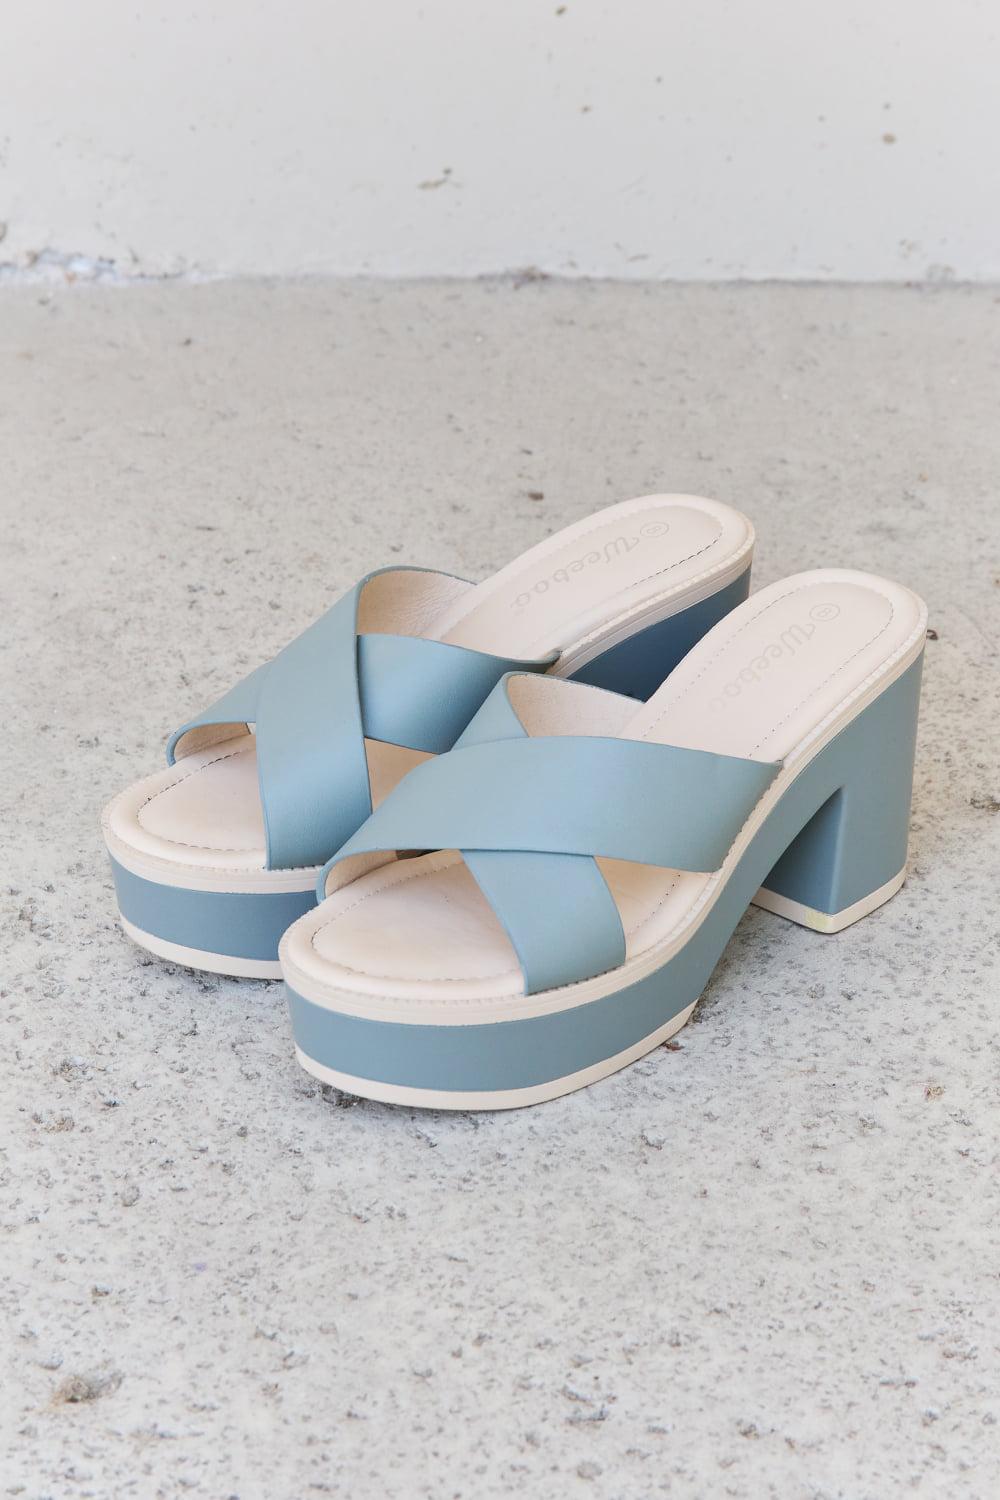 Weeboo Cherish The Moments Contrast Platform Sandals in Misty Blue BLUE ZONE PLANET